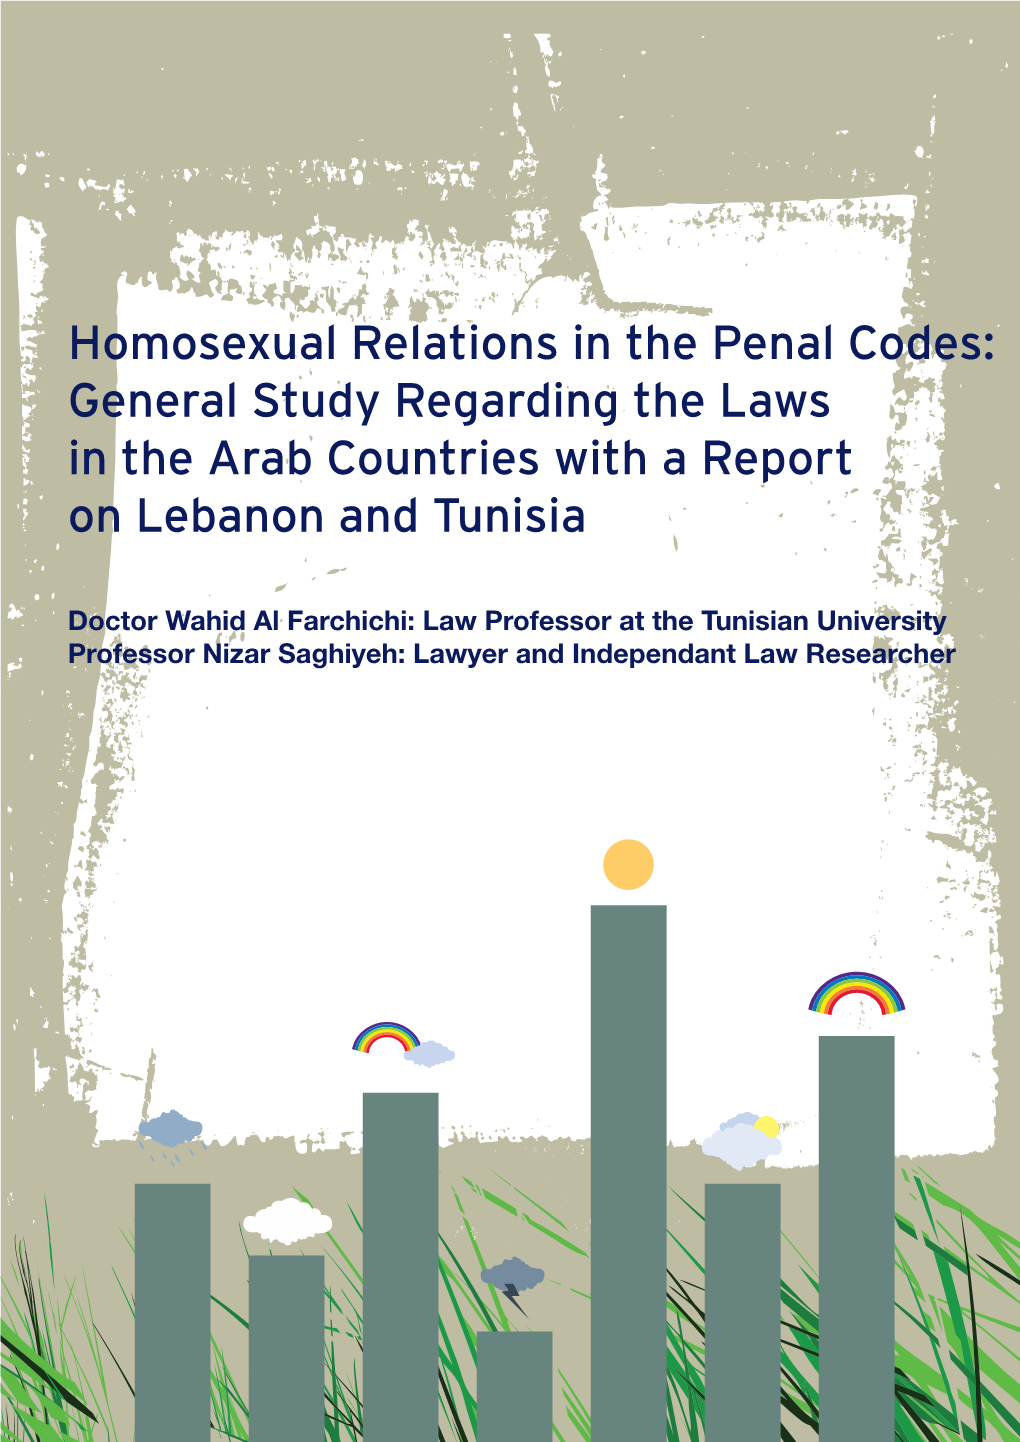 Homosexual Relations in the Penal Codes: General Study Regarding the Laws in the Arab Countries with a Report on Lebanon and Tunisia